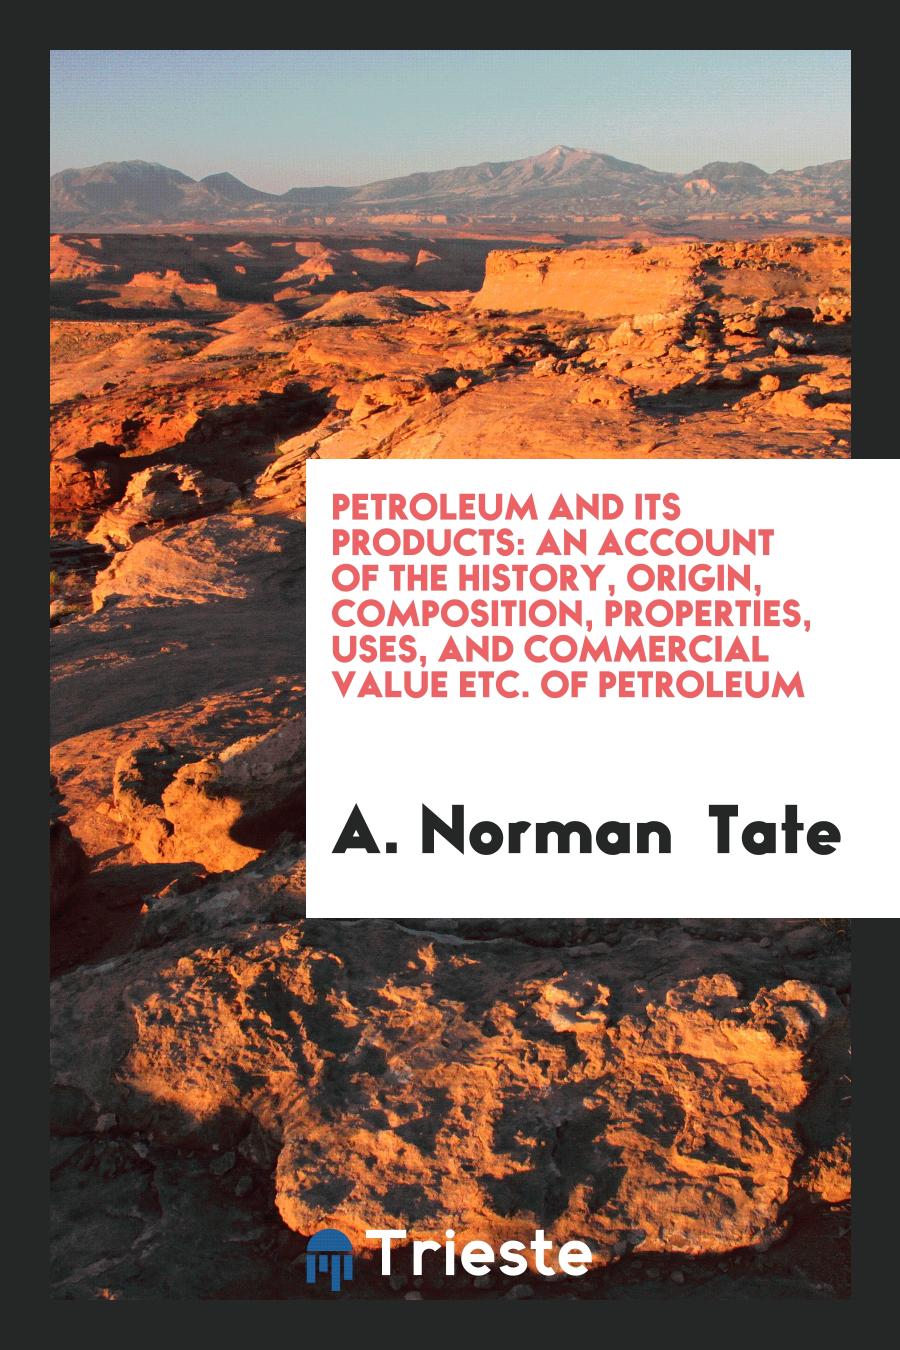 Petroleum and Its Products: An Account of the History, Origin, Composition, Properties, Uses, and Commercial Value Etc. of Petroleum